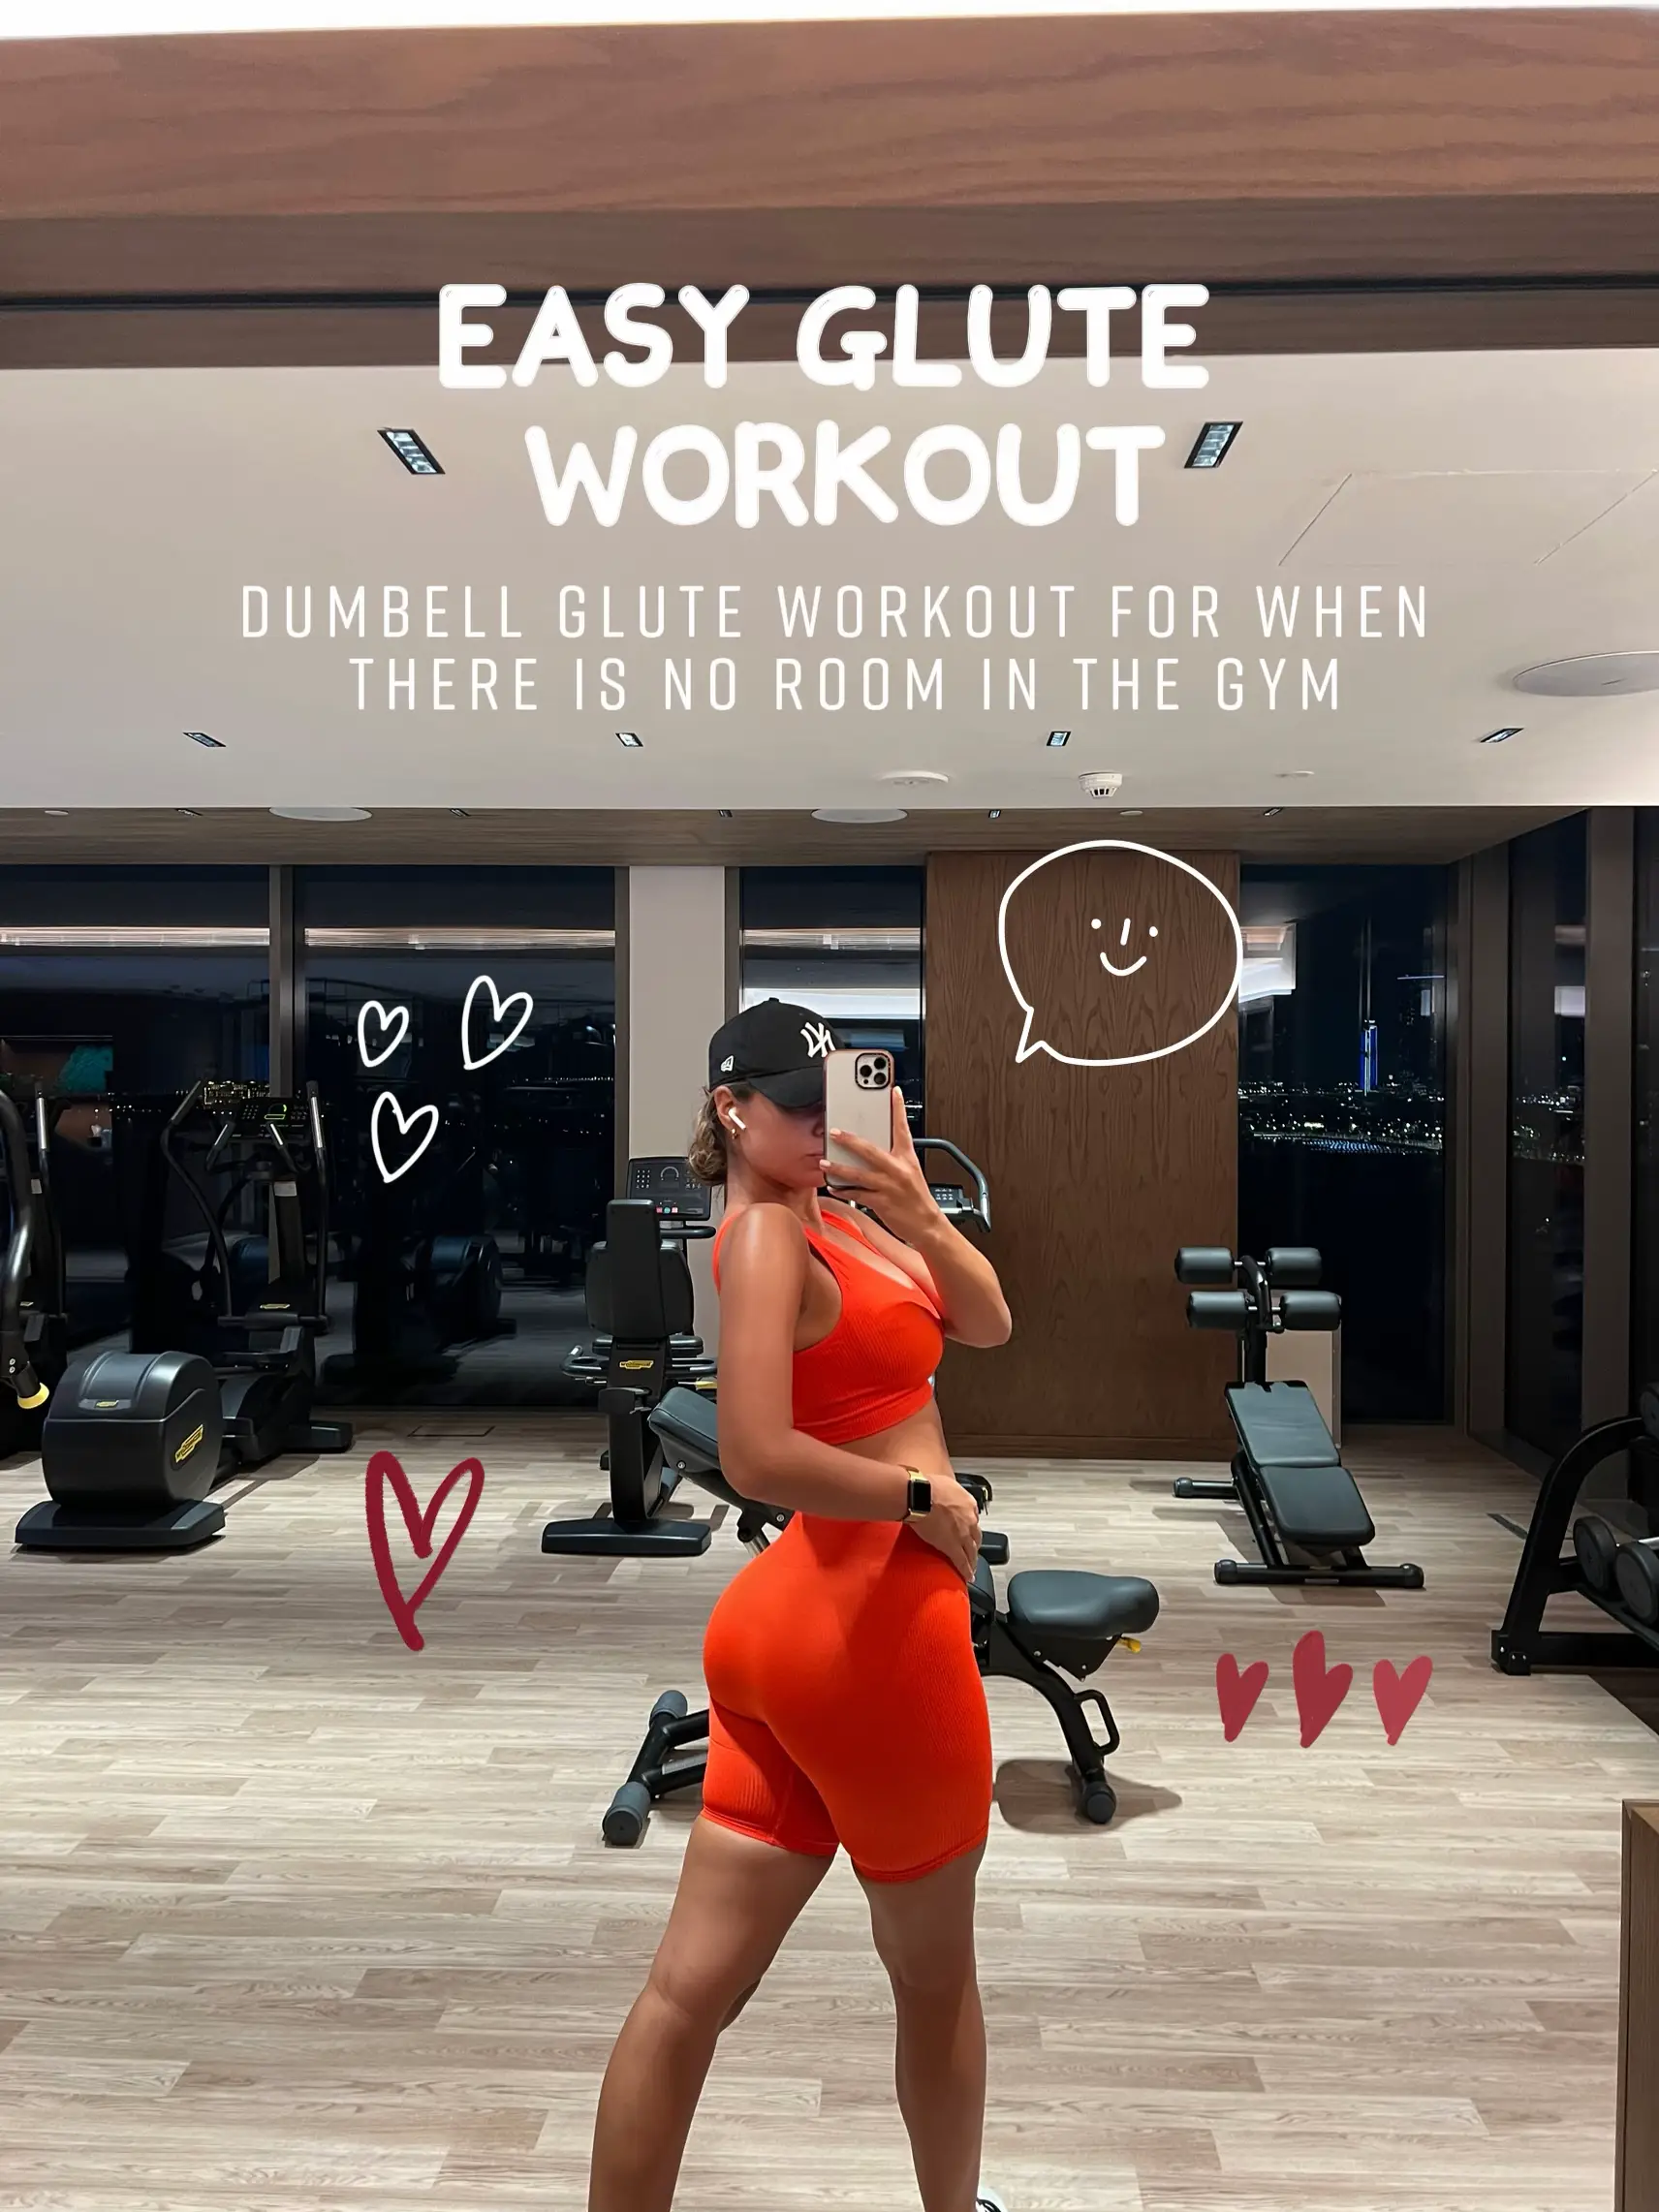 Easy Glute dumbell workout 🍑💪🏽, Gallery posted by Tash Soodeen